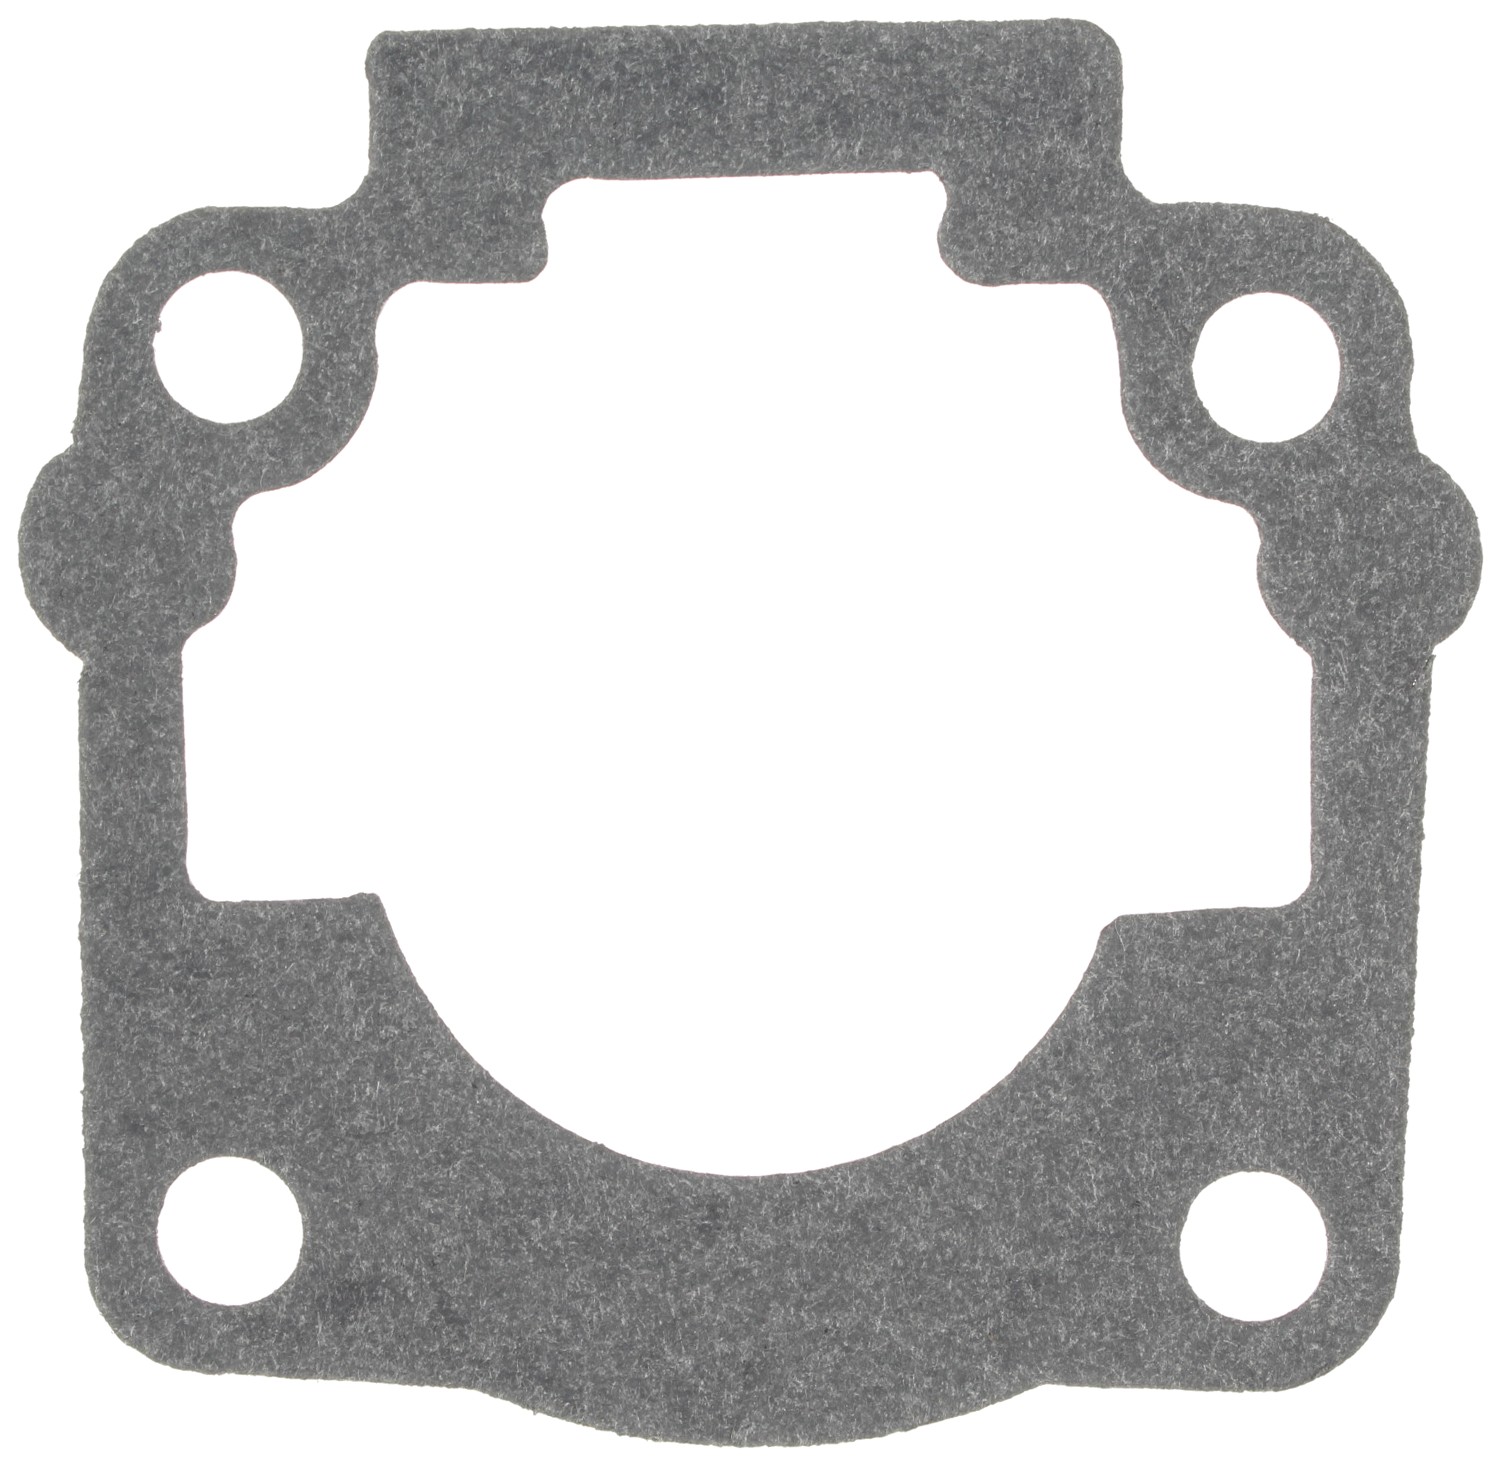 G33075_MAHLE Fuel Injection Throttle Body Mounting Gasket